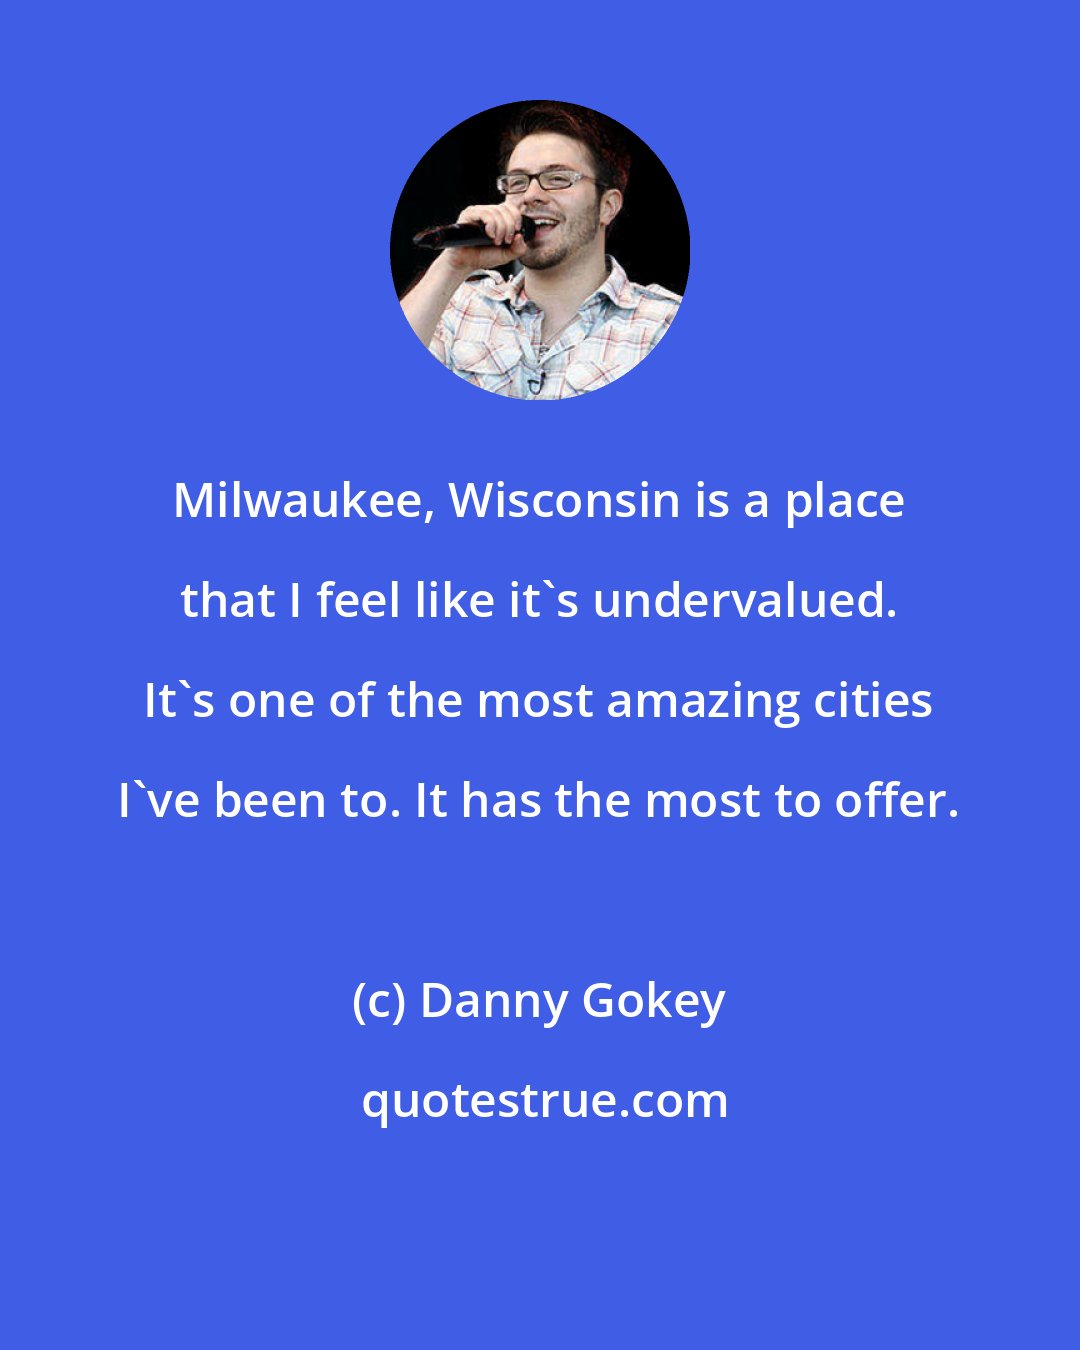 Danny Gokey: Milwaukee, Wisconsin is a place that I feel like it's undervalued. It's one of the most amazing cities I've been to. It has the most to offer.